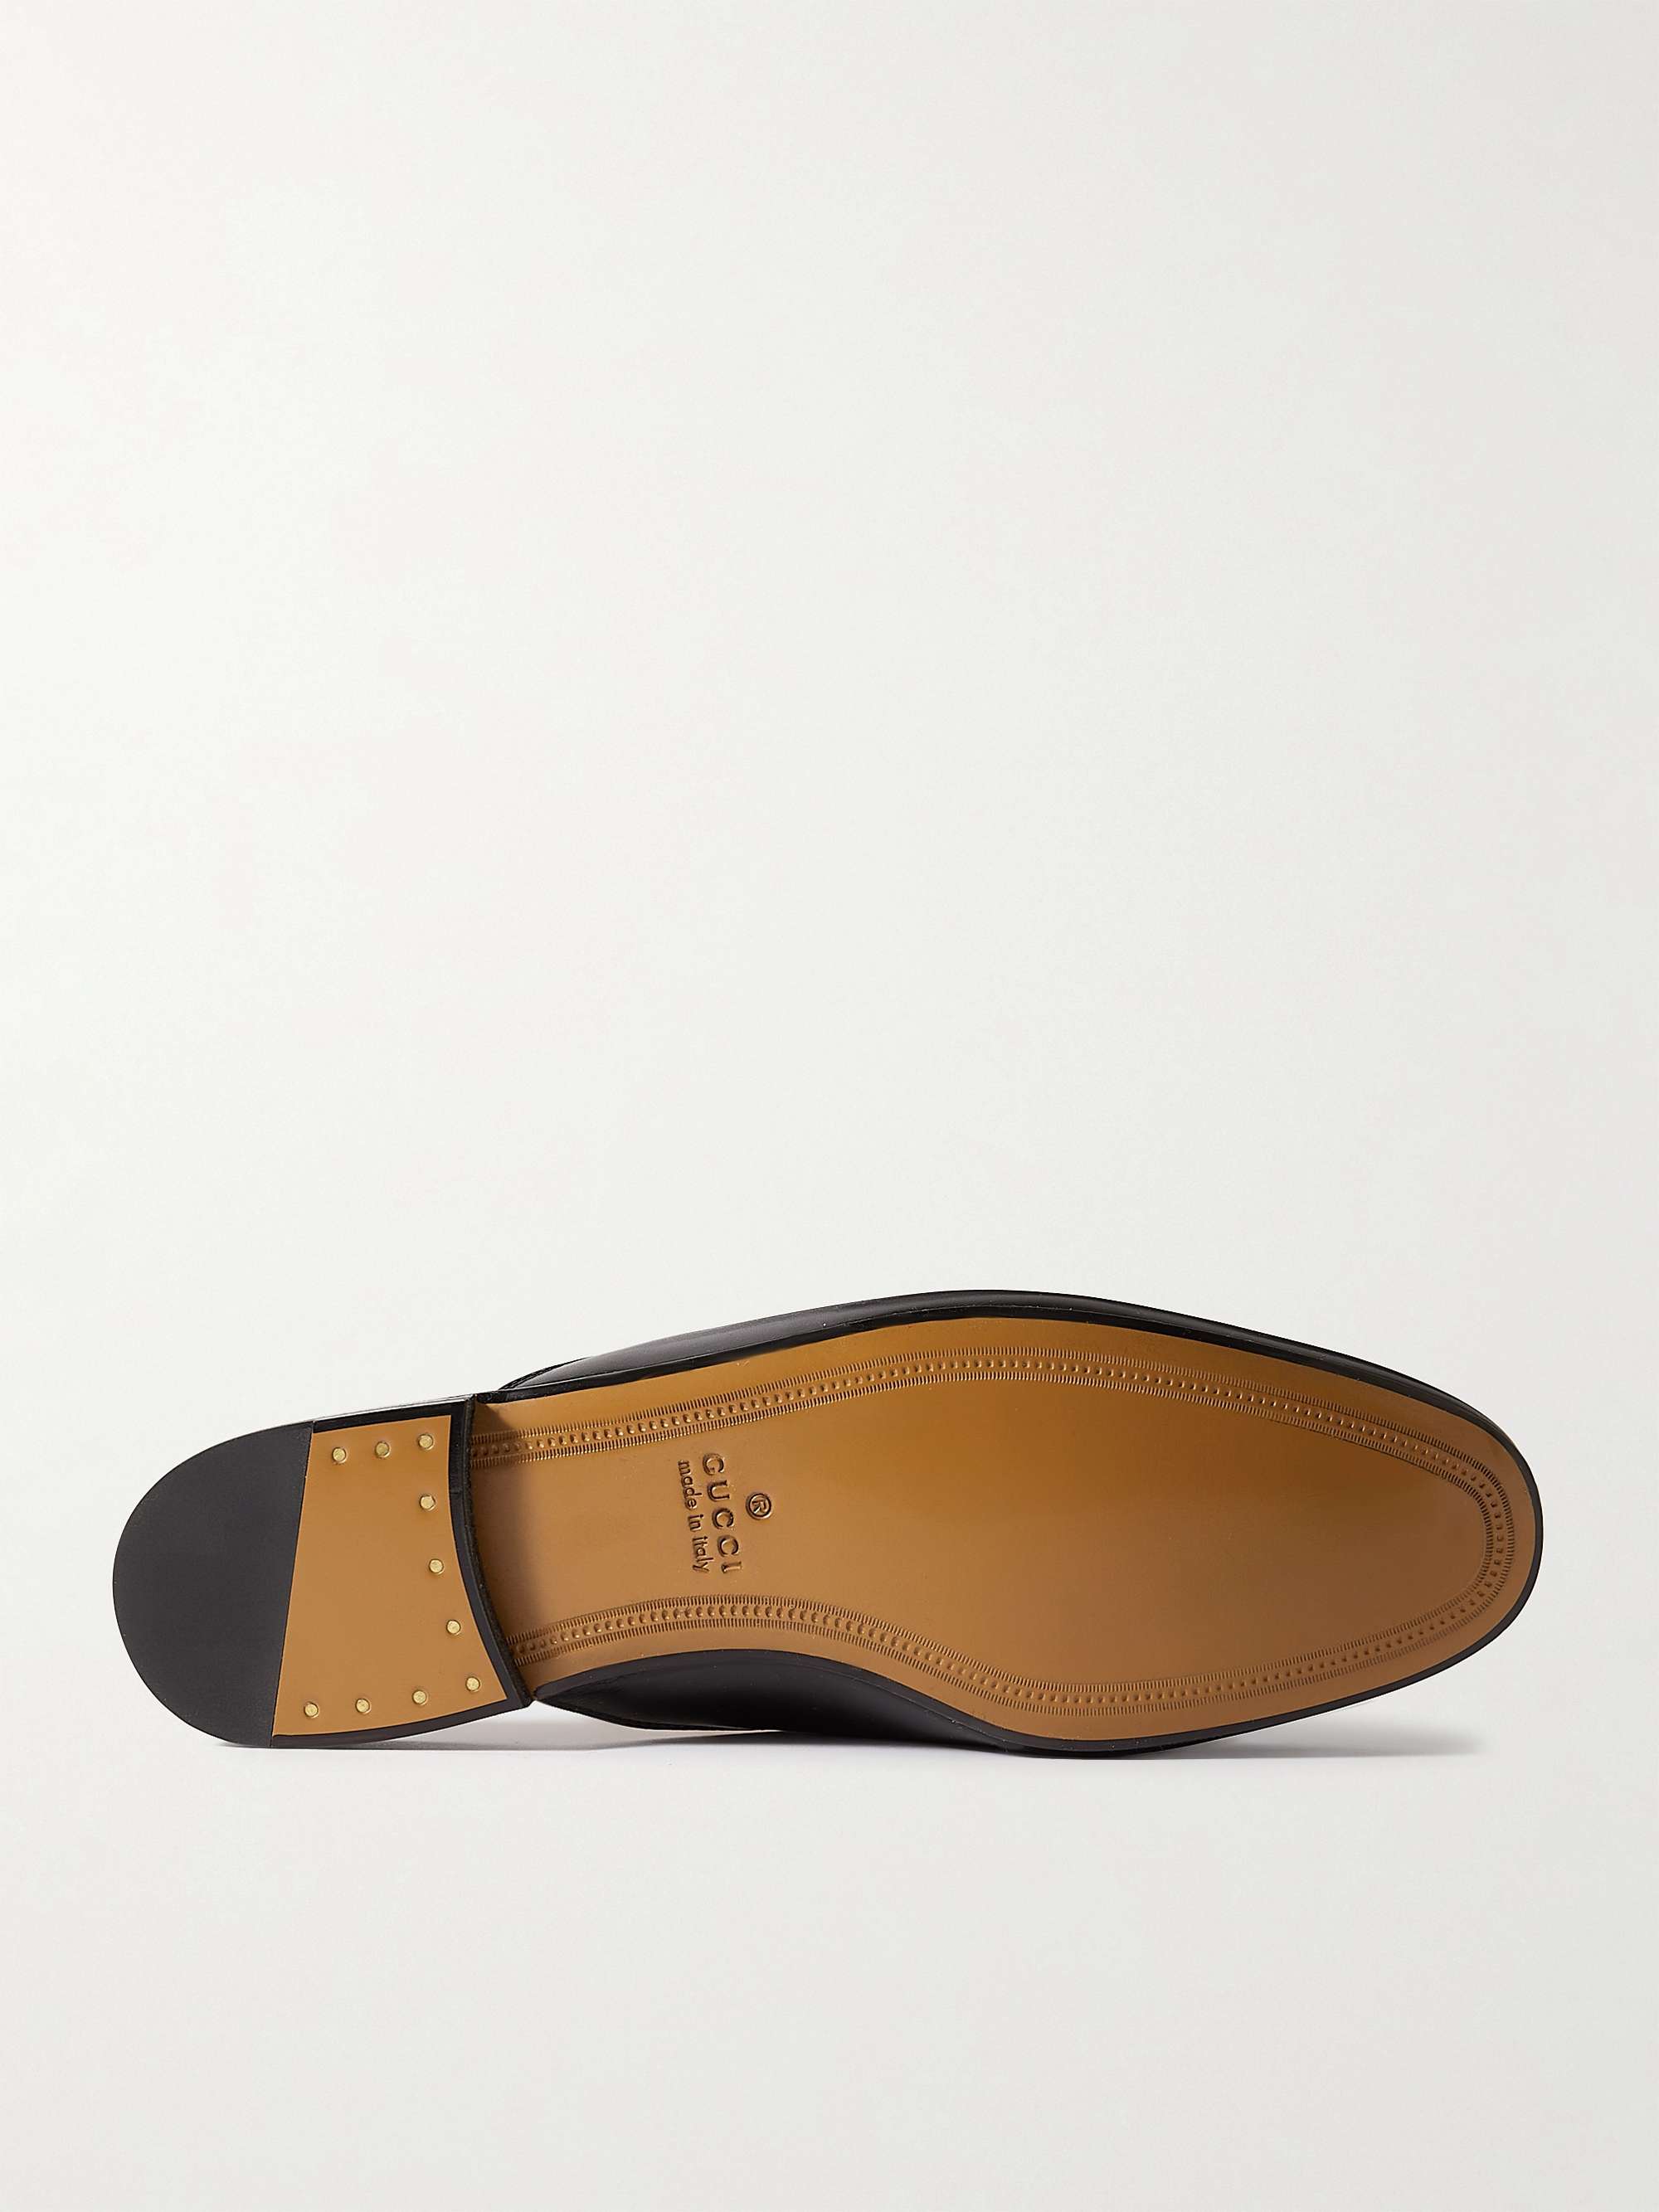 GUCCI Horsebit Leather Backless Loafers | MR PORTER